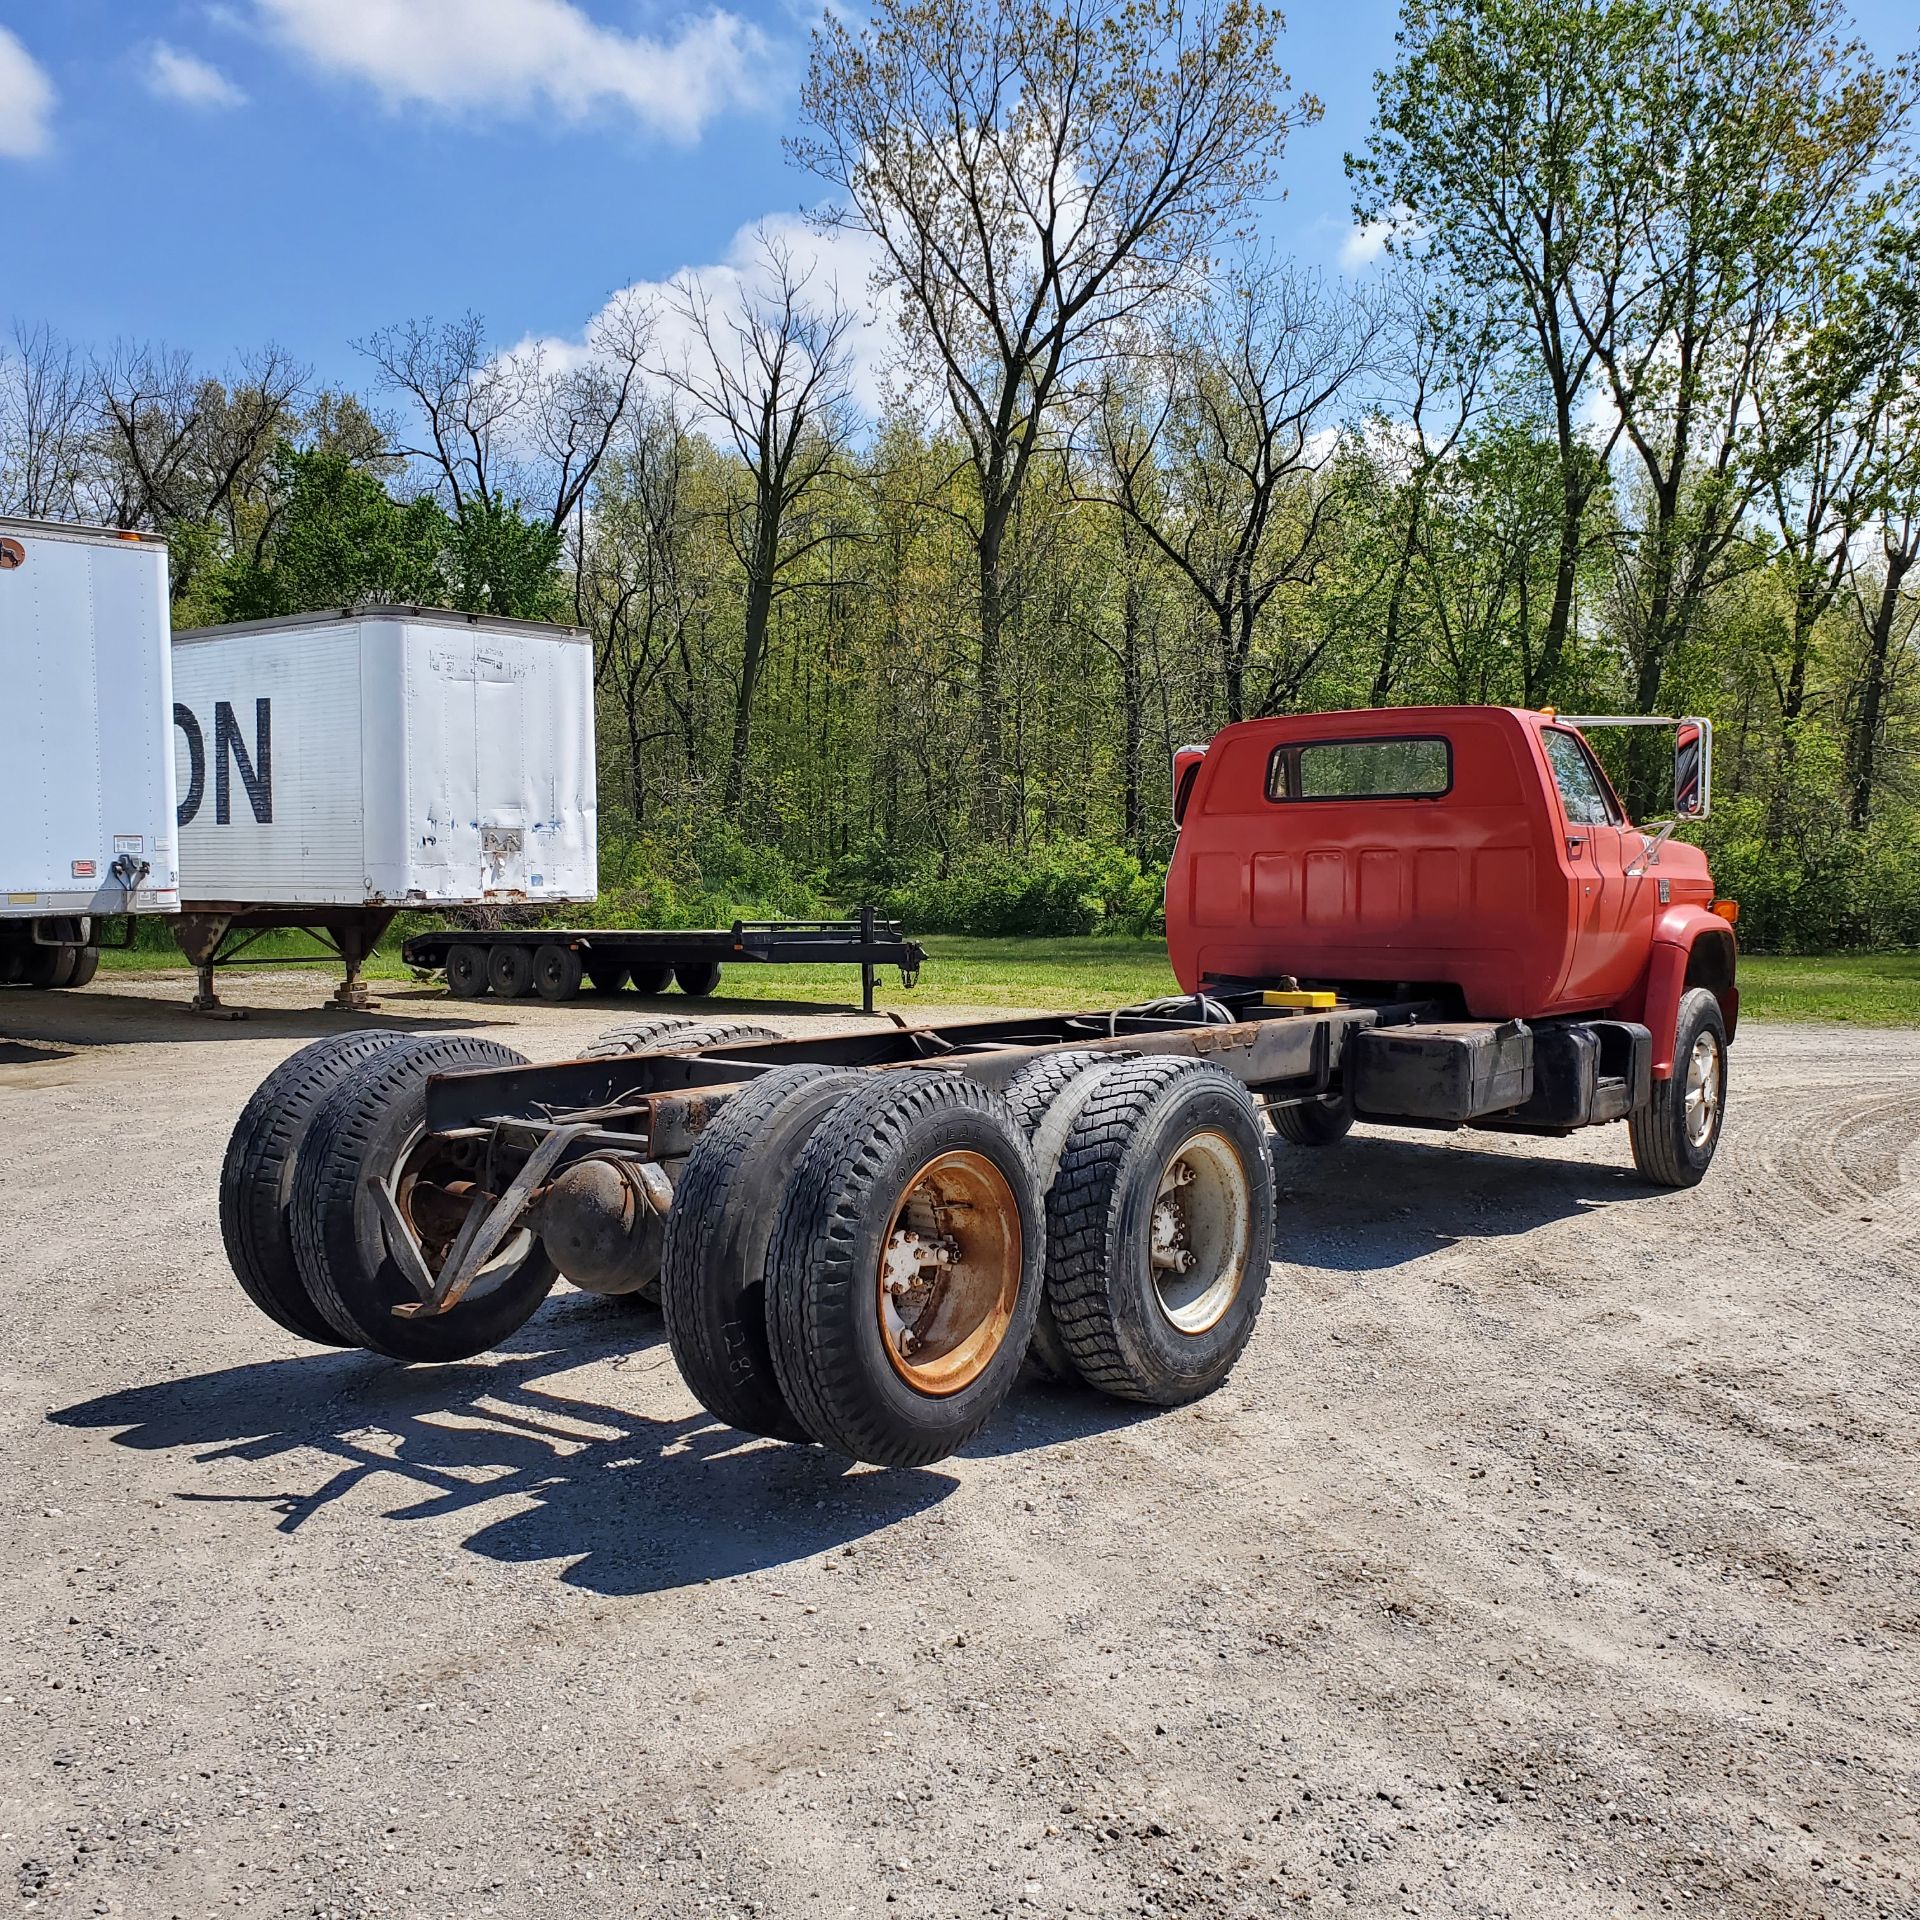 1977 Chevrolet C60 Cab and Chassis, Single Axle w/ Dual Tires and Tag Axle, 5 Speed Transmission - Image 5 of 19